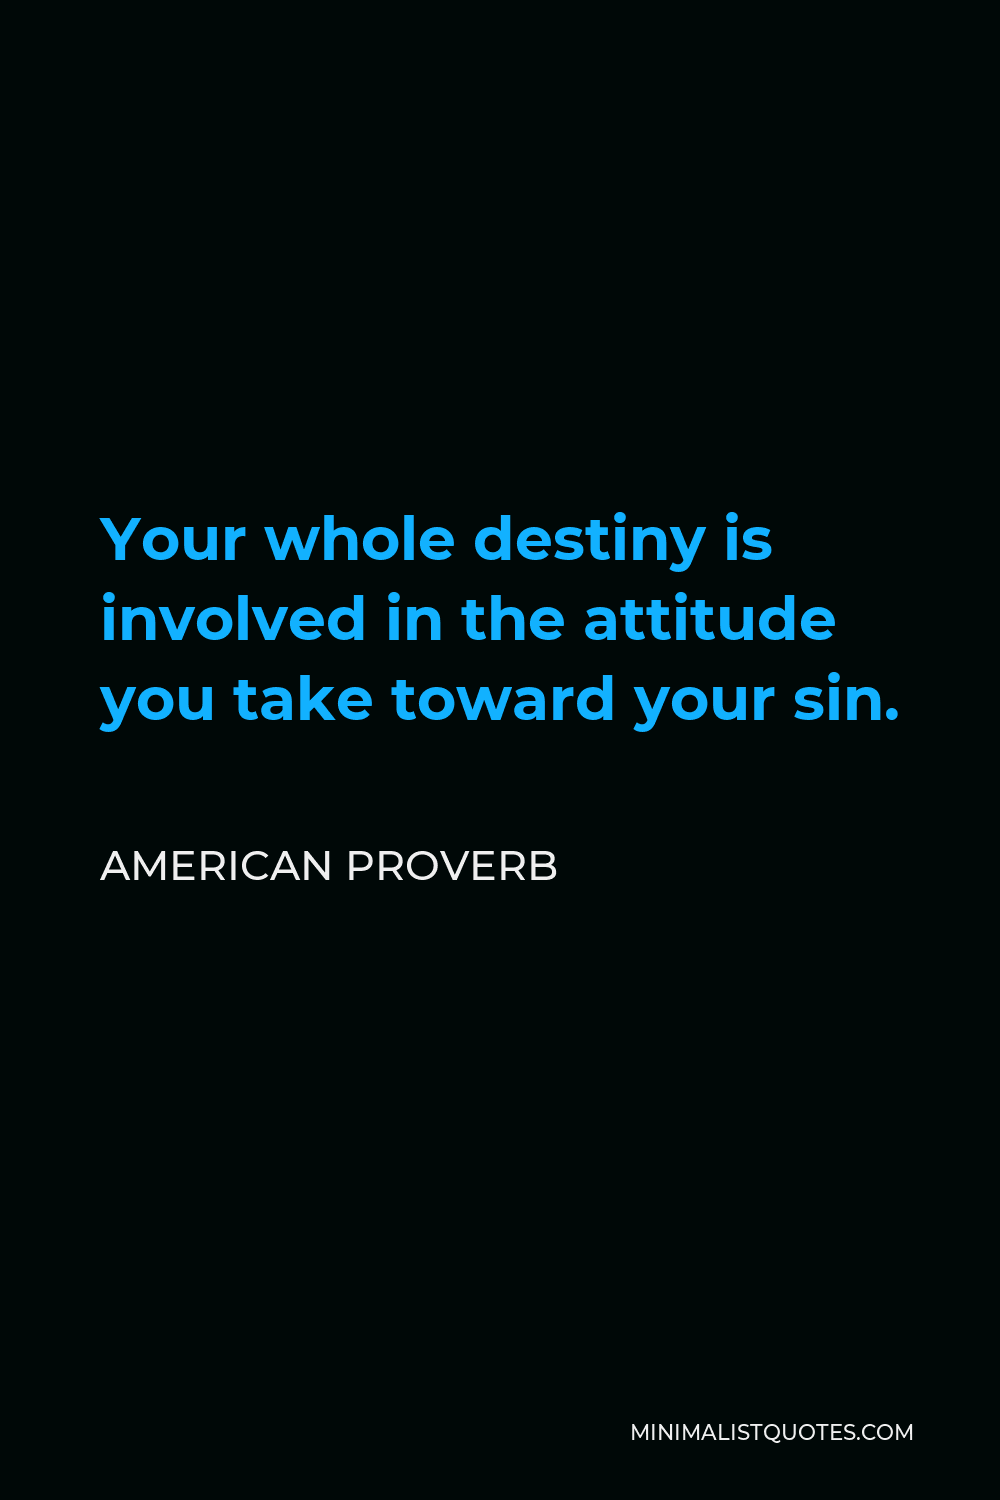 American Proverb Quote - Your whole destiny is involved in the attitude you take toward your sin.